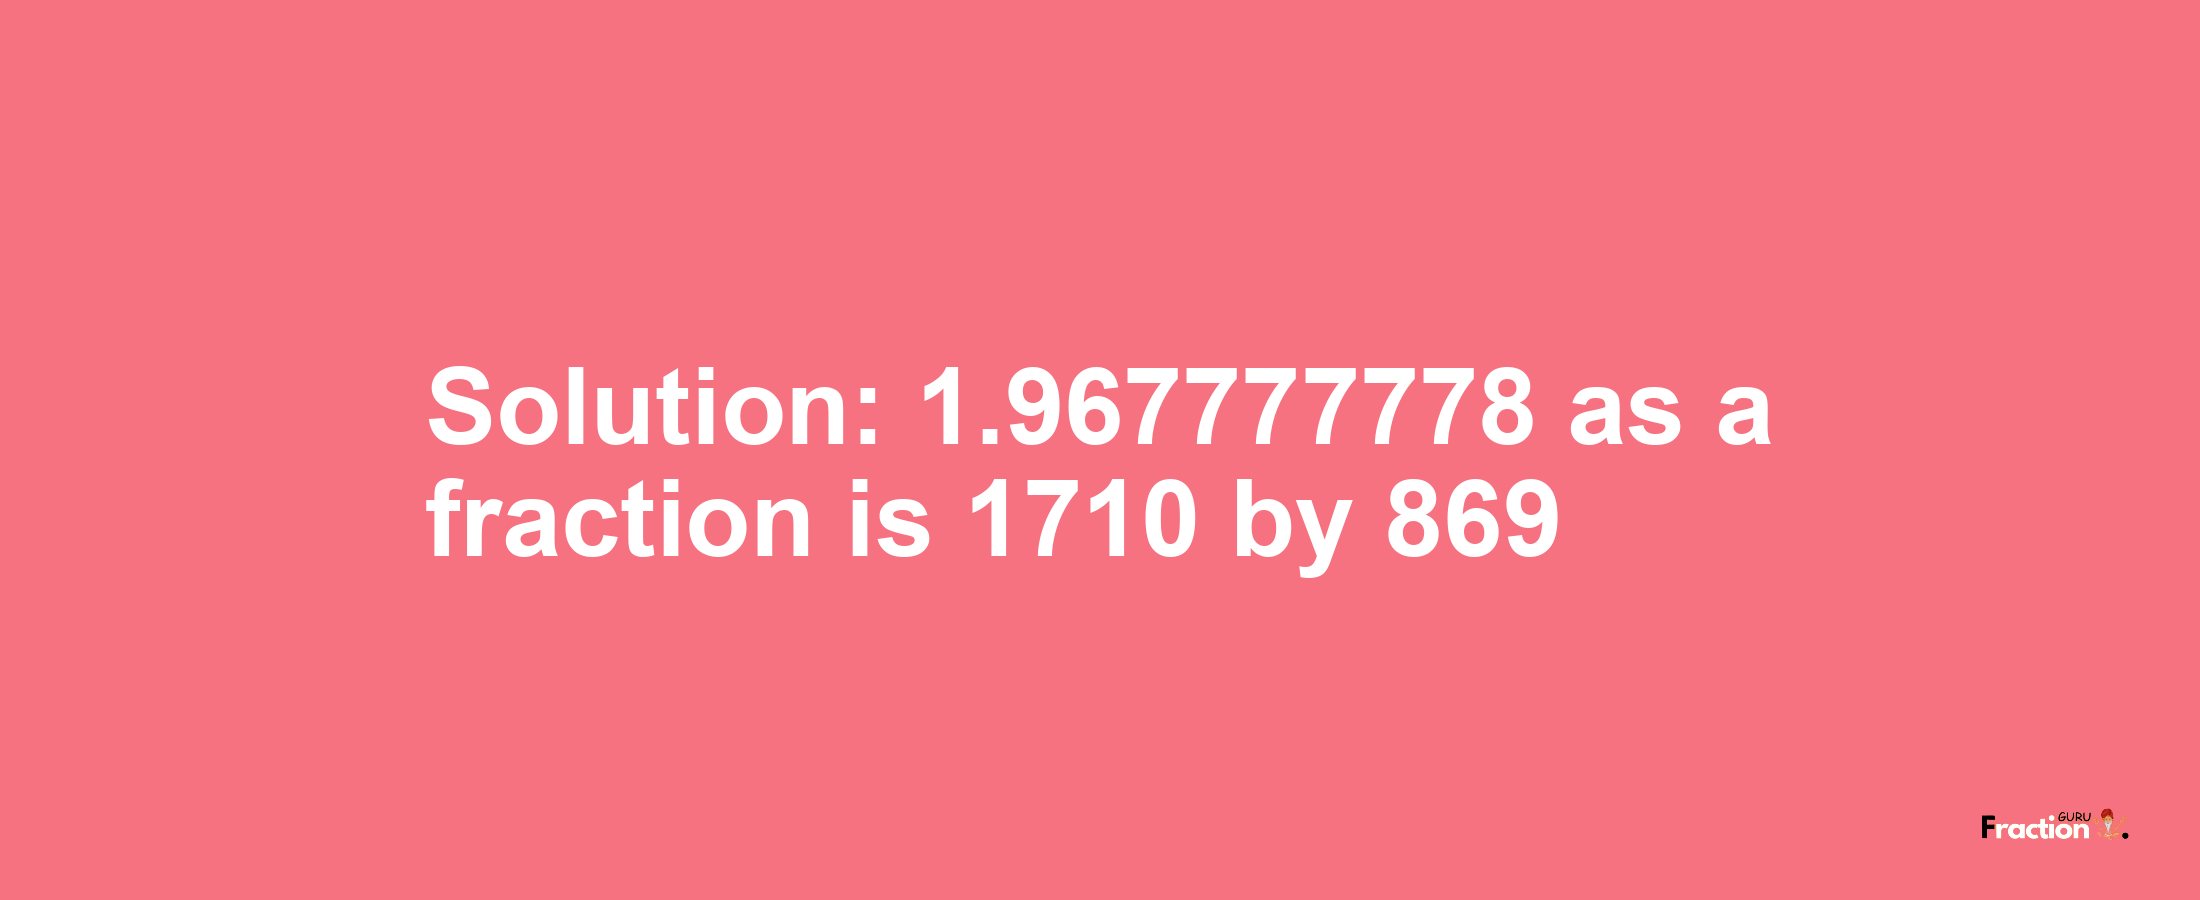 Solution:1.967777778 as a fraction is 1710/869